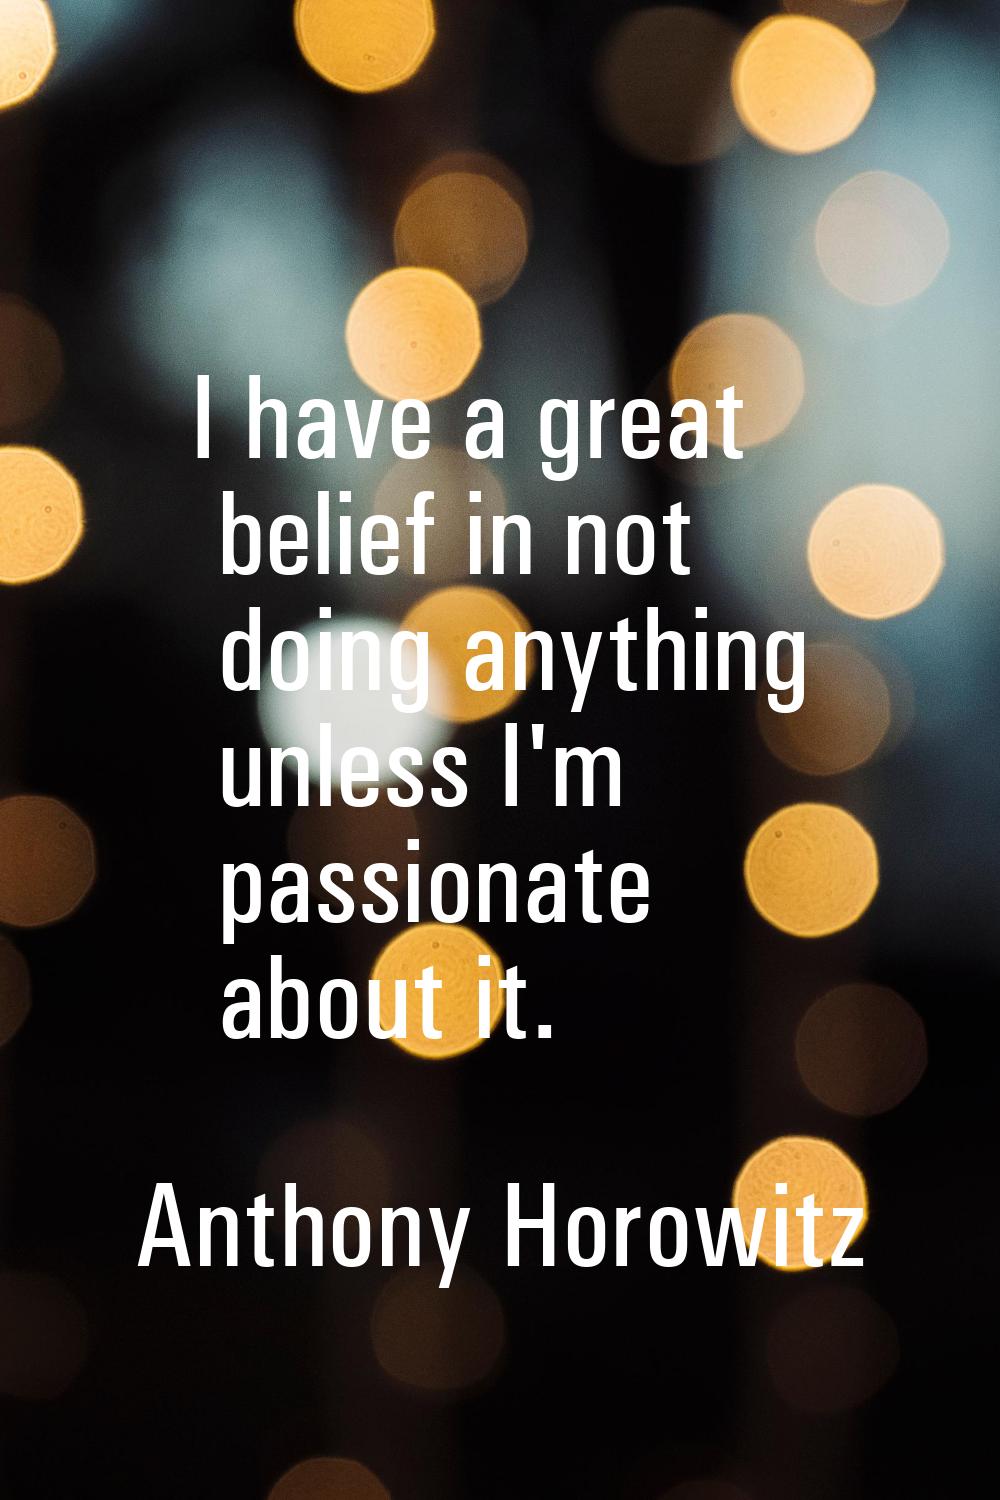 I have a great belief in not doing anything unless I'm passionate about it.